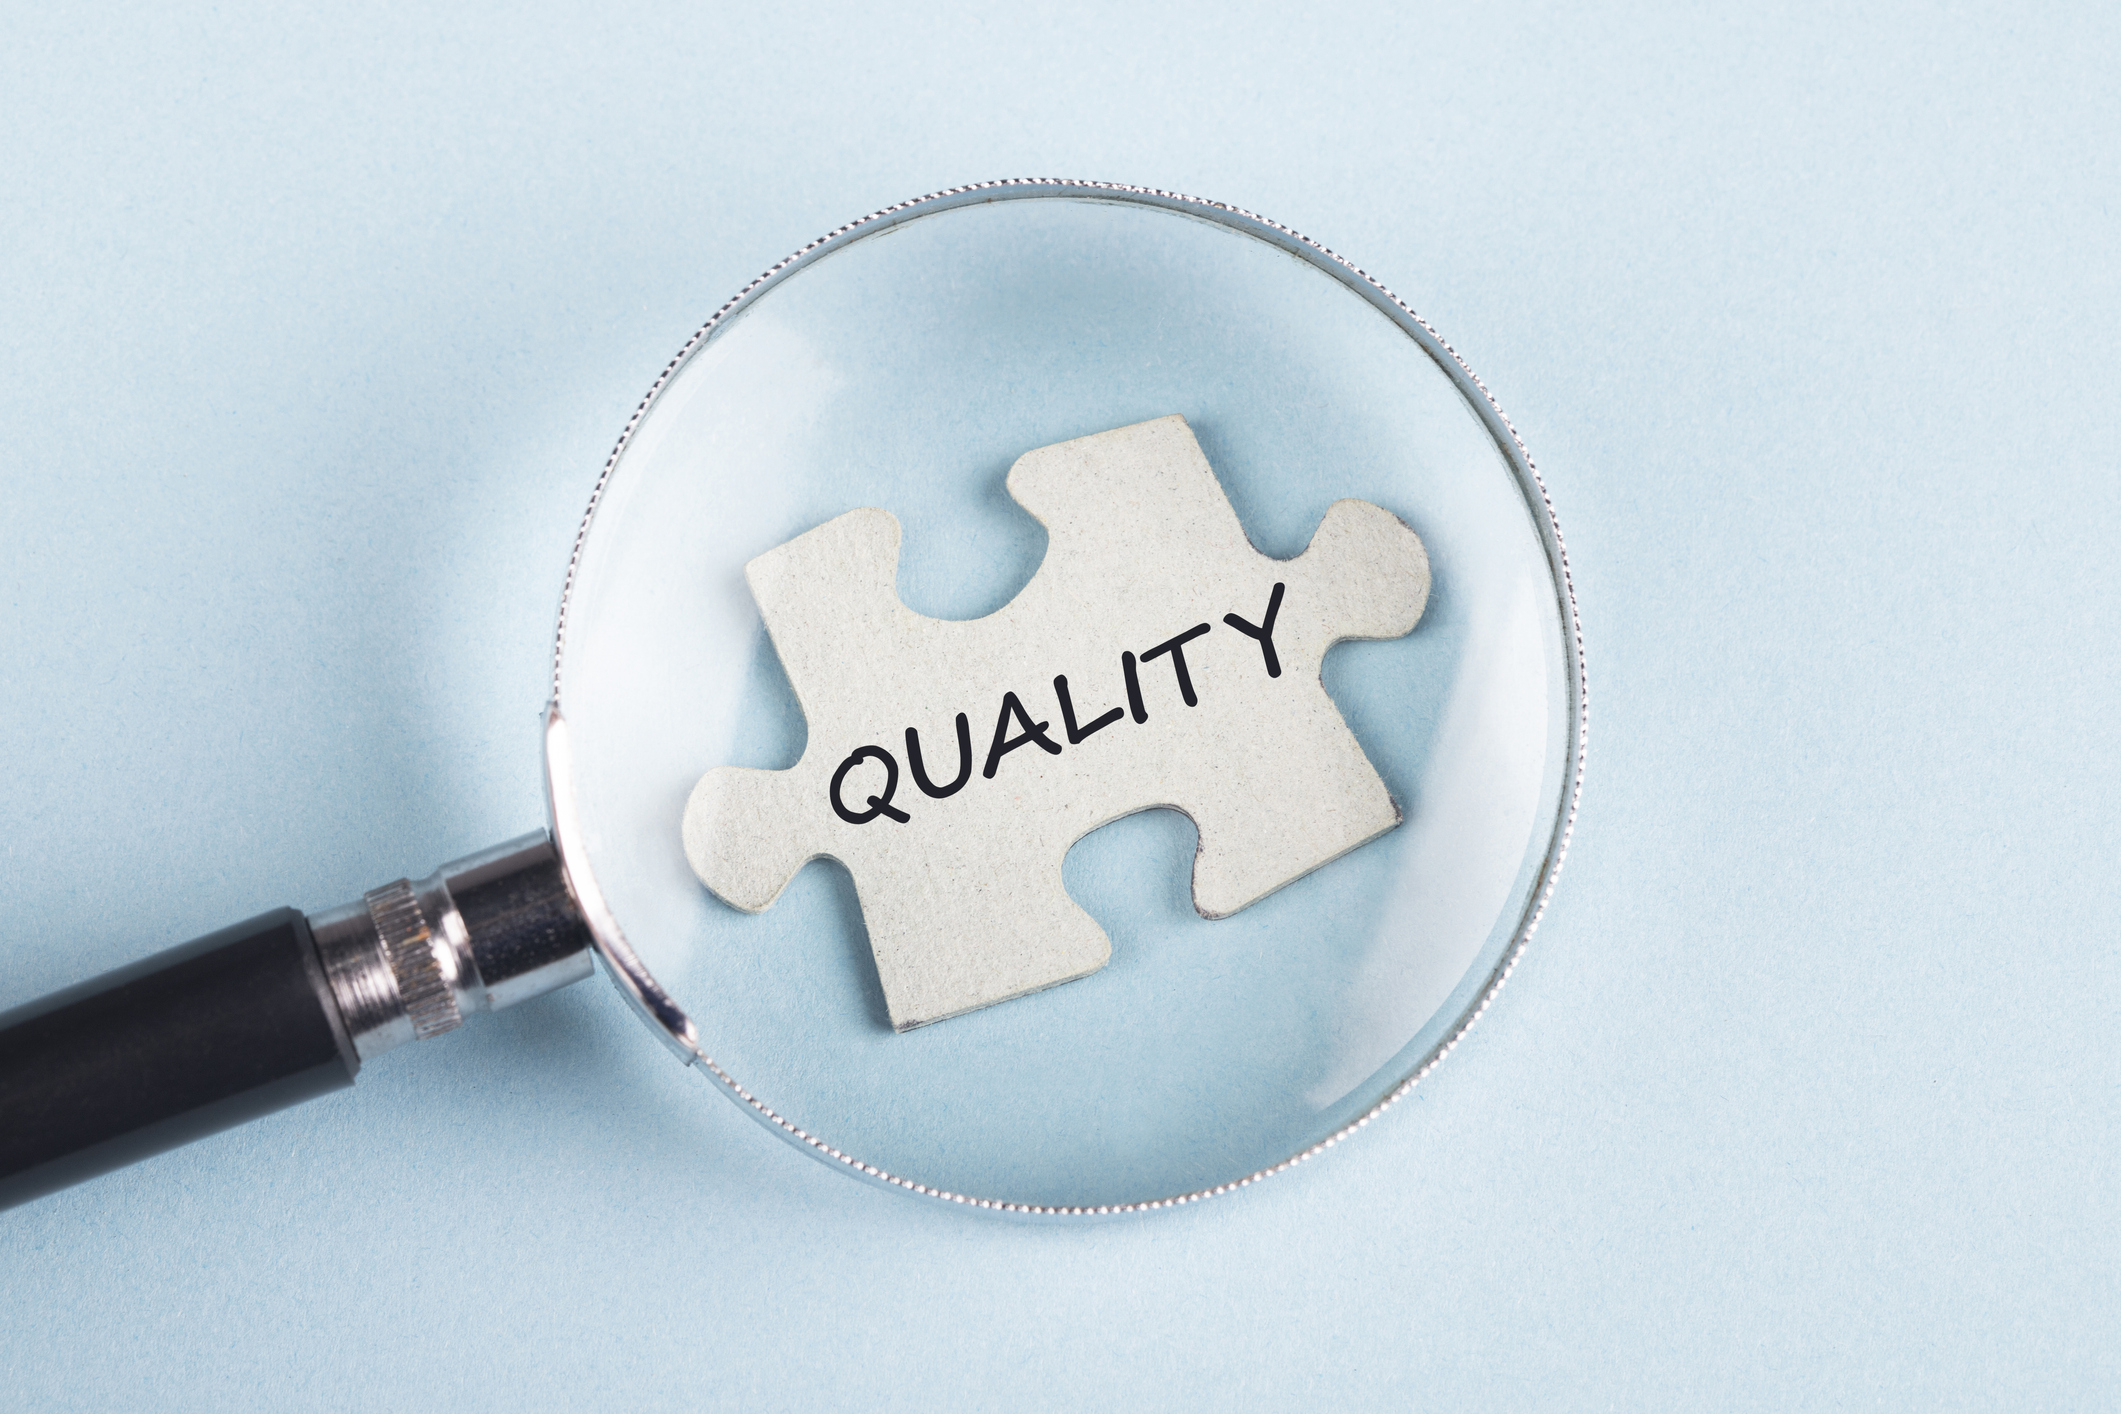 Quality Management Maturity Document Released by FDA